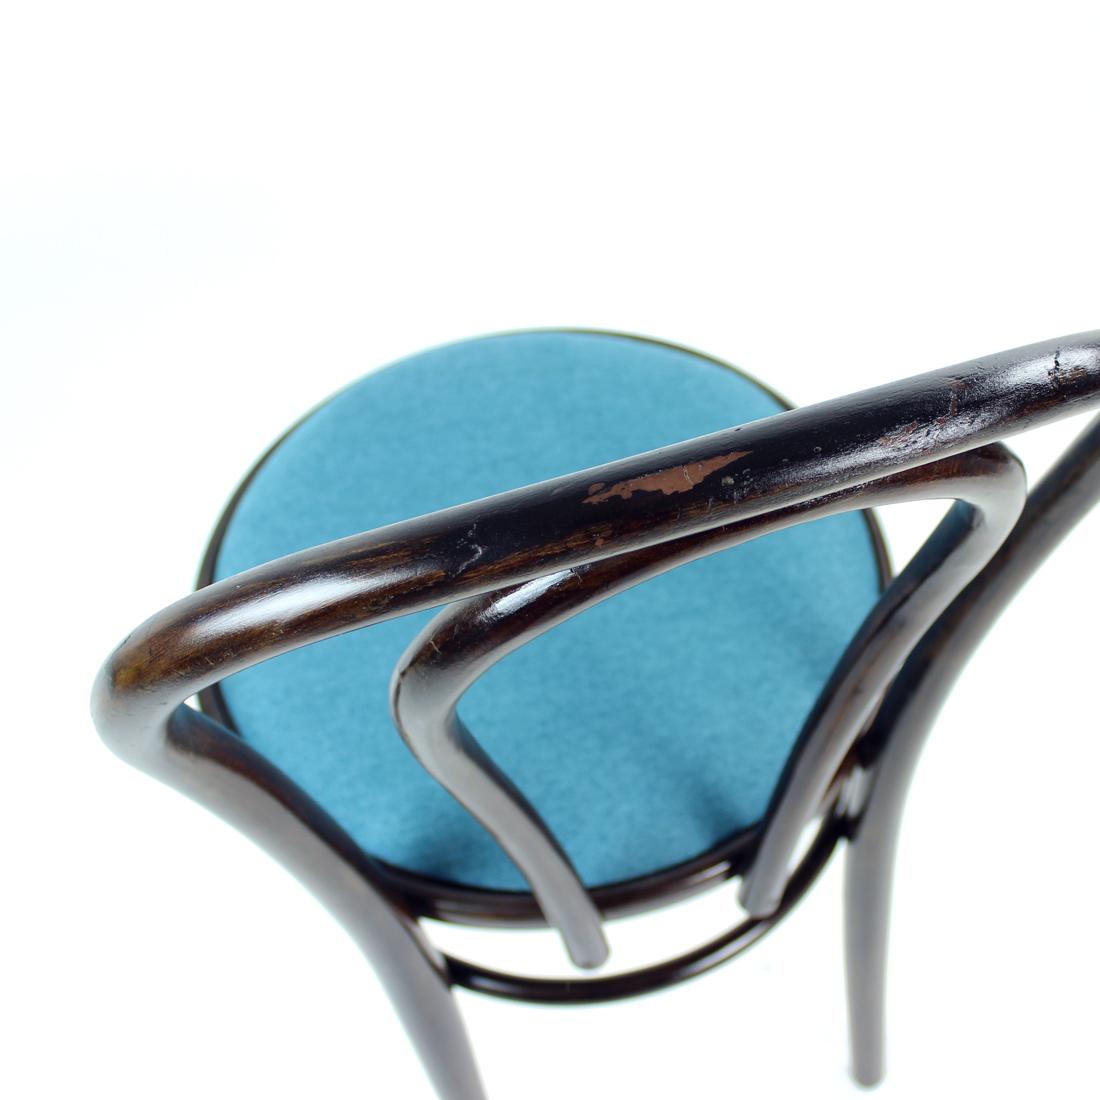 Thonet No. 16 Bistro Chair Model by Ton, Czechoslovakia 1960s For Sale 3